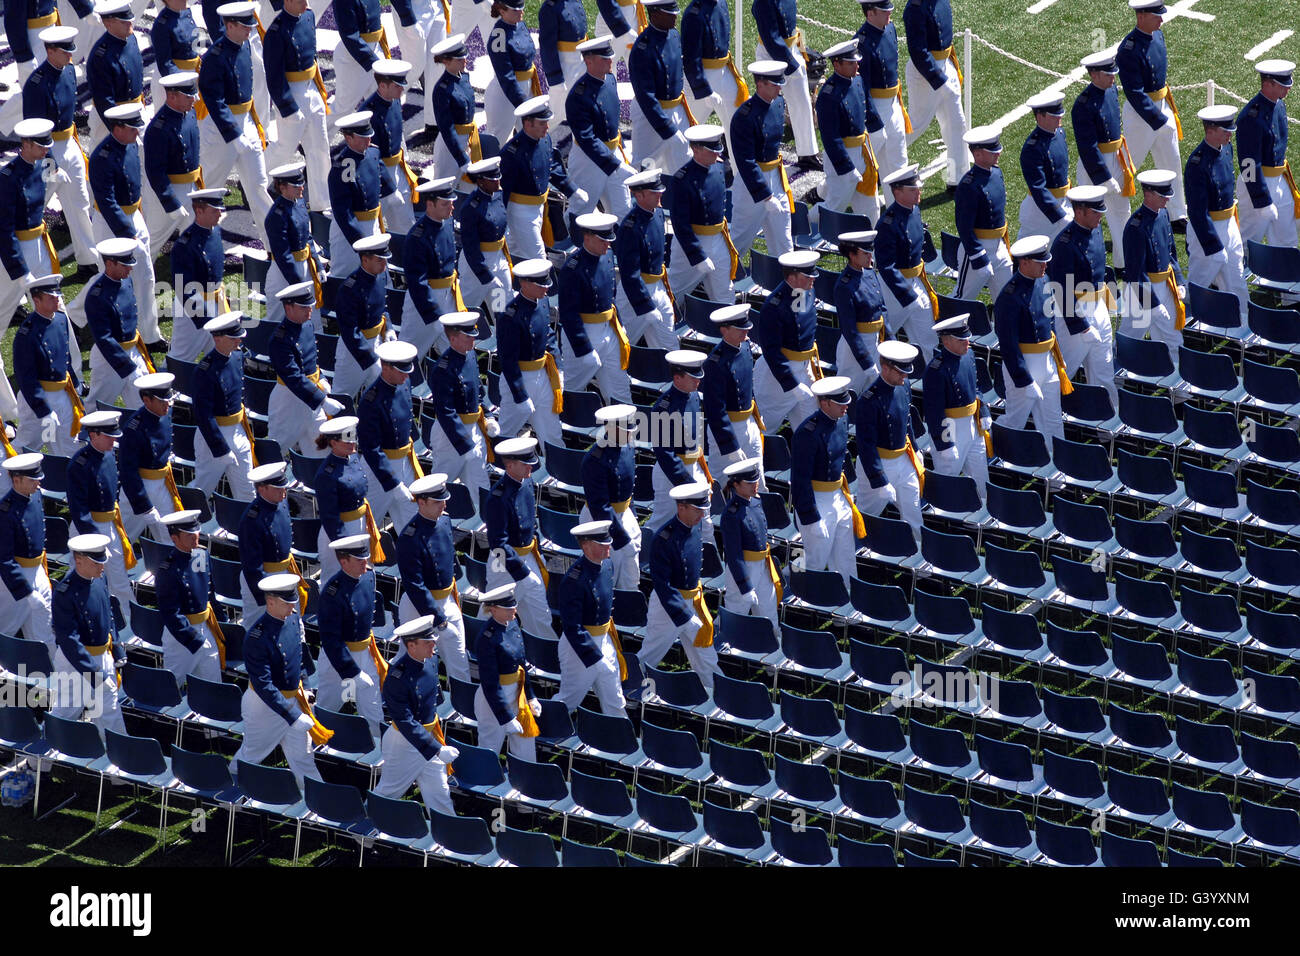 Members of the U.S. Air Force Academy. Stock Photo